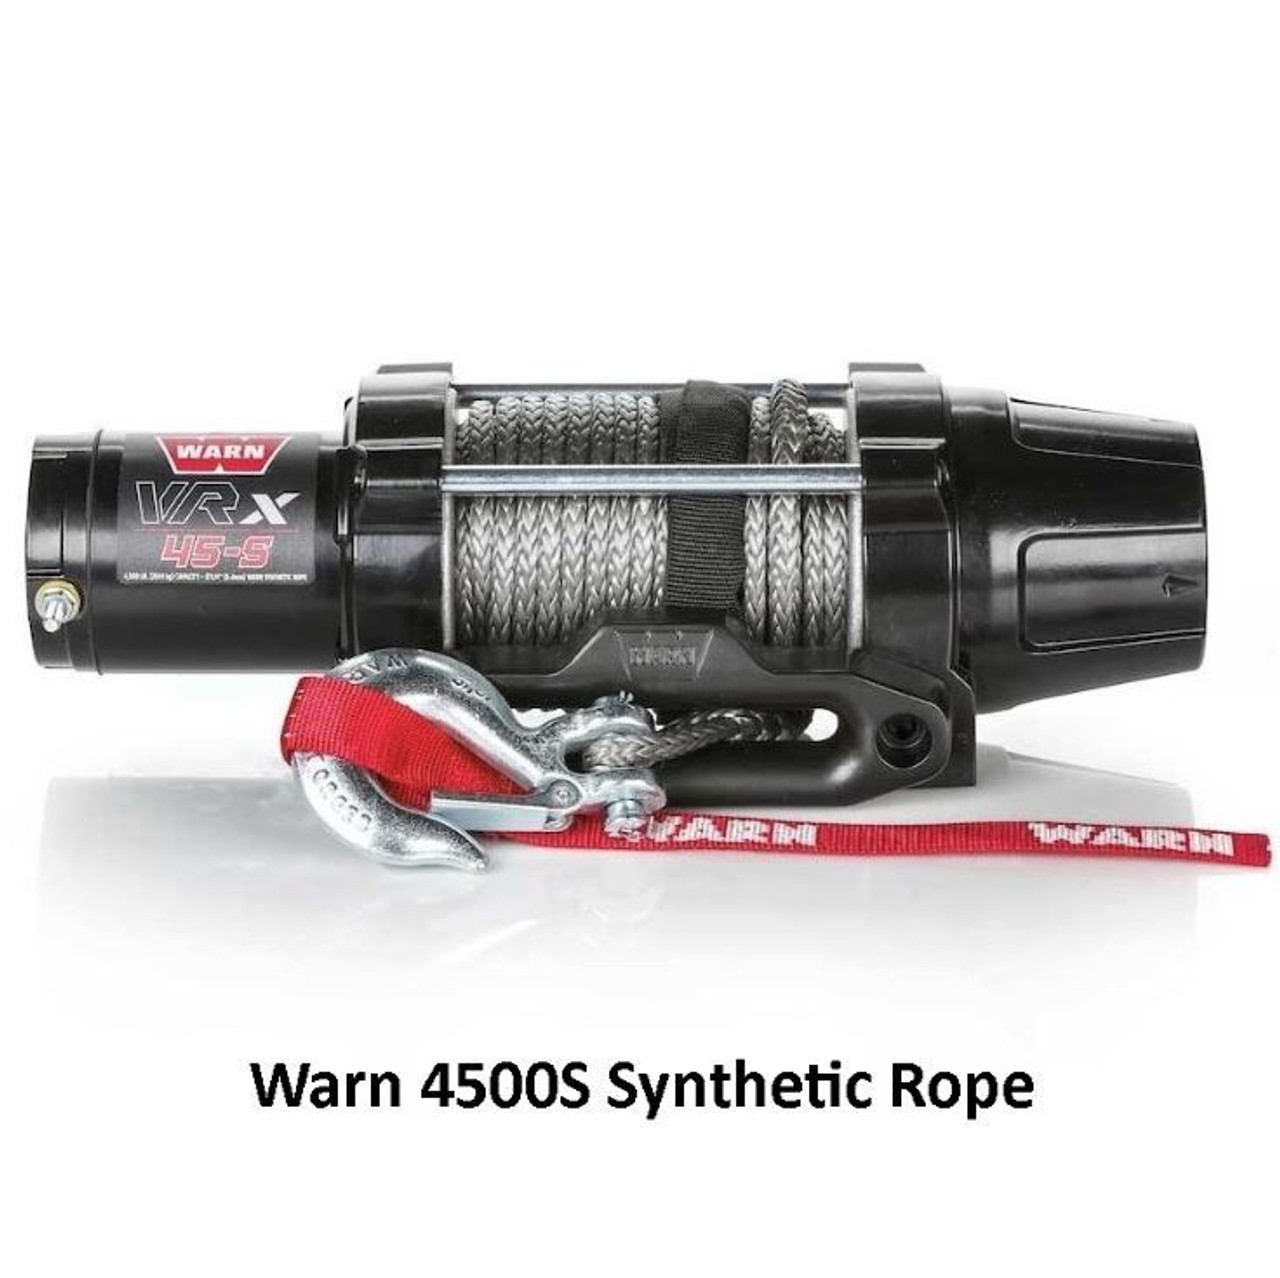 Warn VRX 45 Synthetic Rope Winch